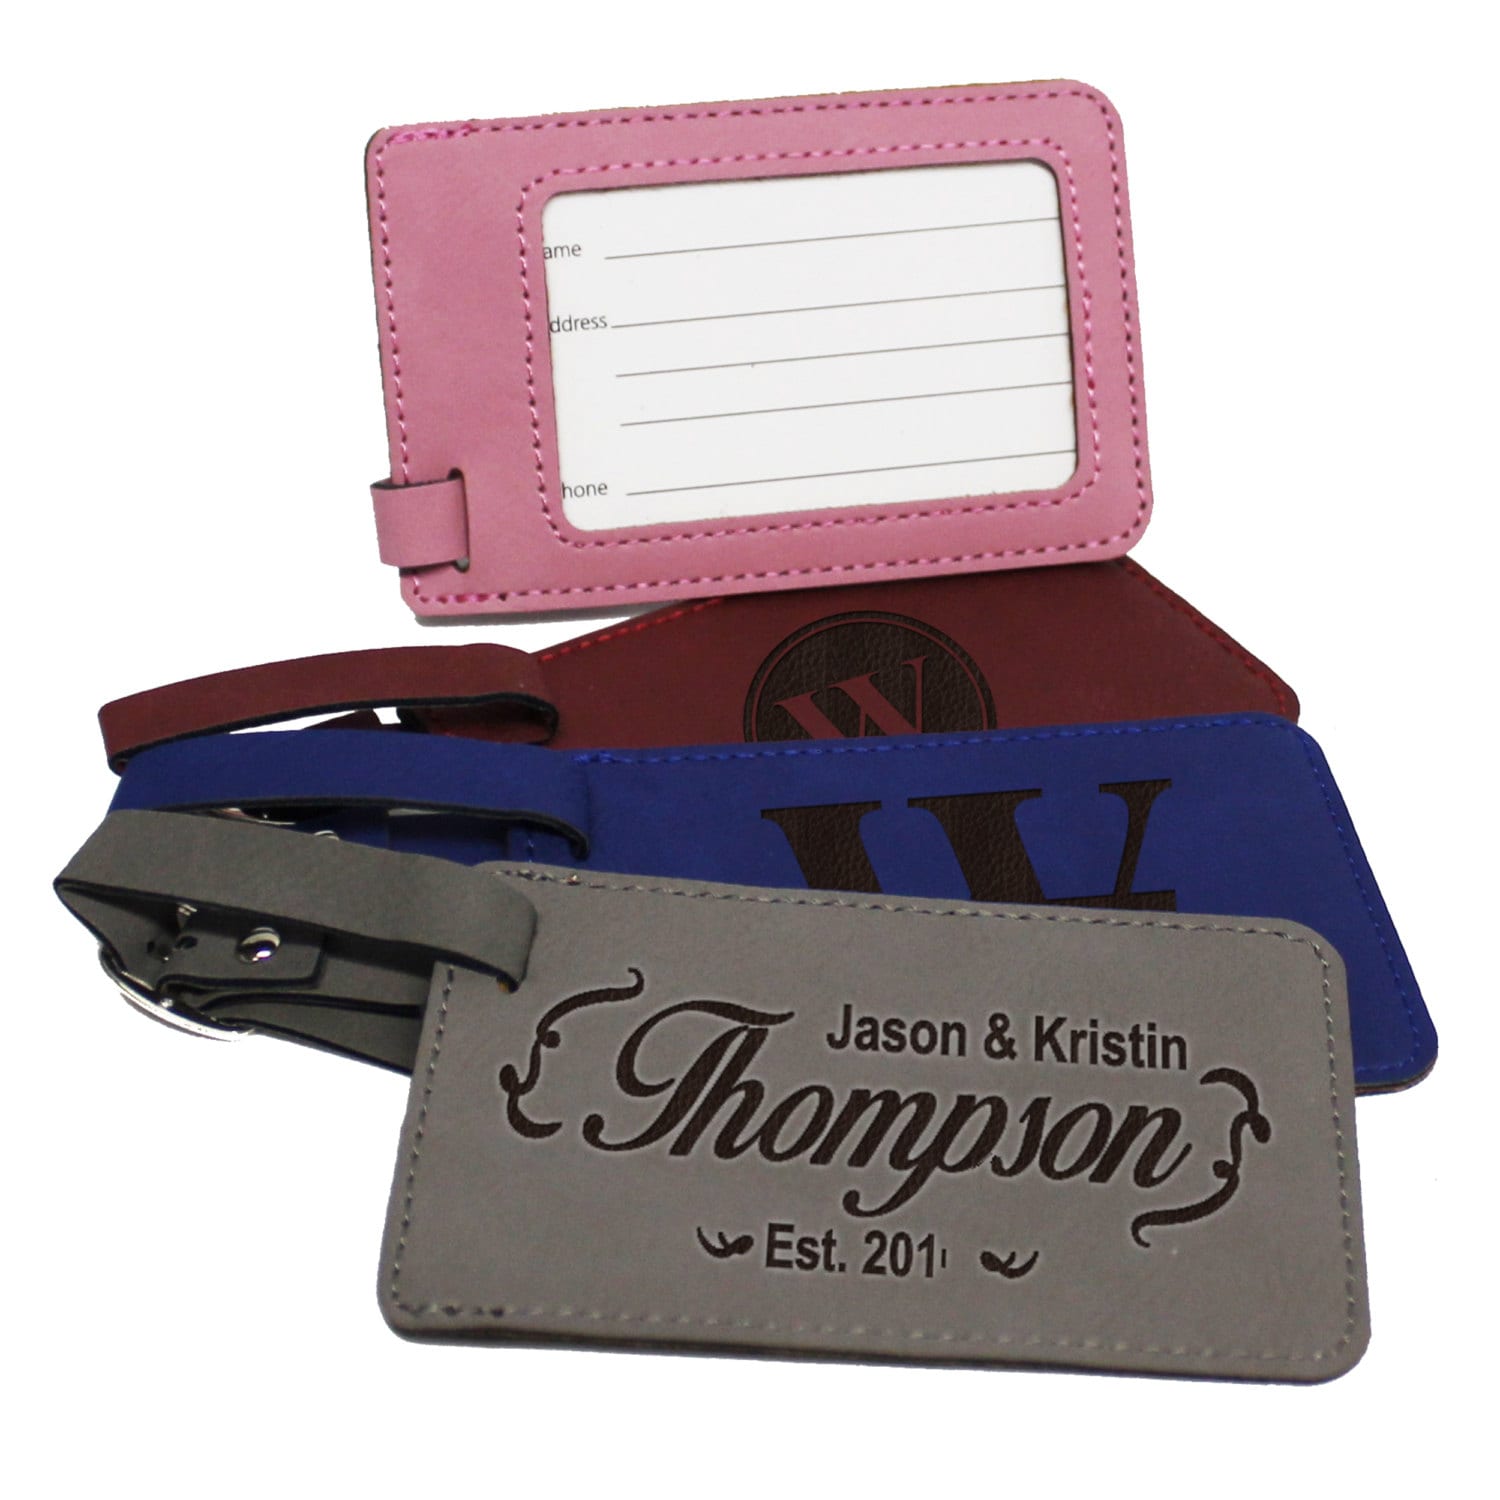 embroidered personalized luggage tags